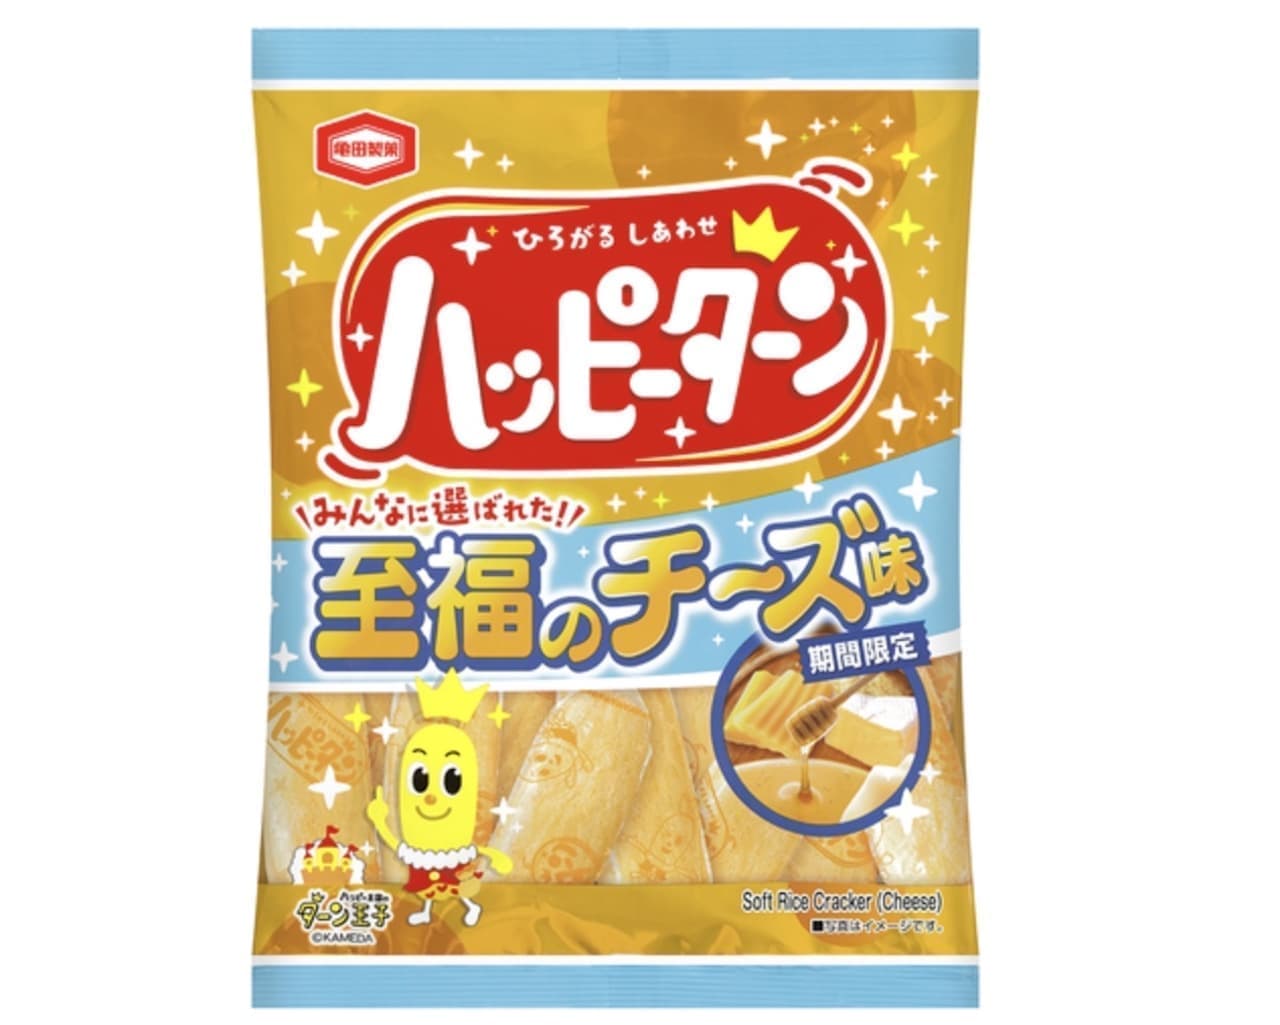 Kameda Confectionery "Happy Turn Blissful Cheese Flavor"